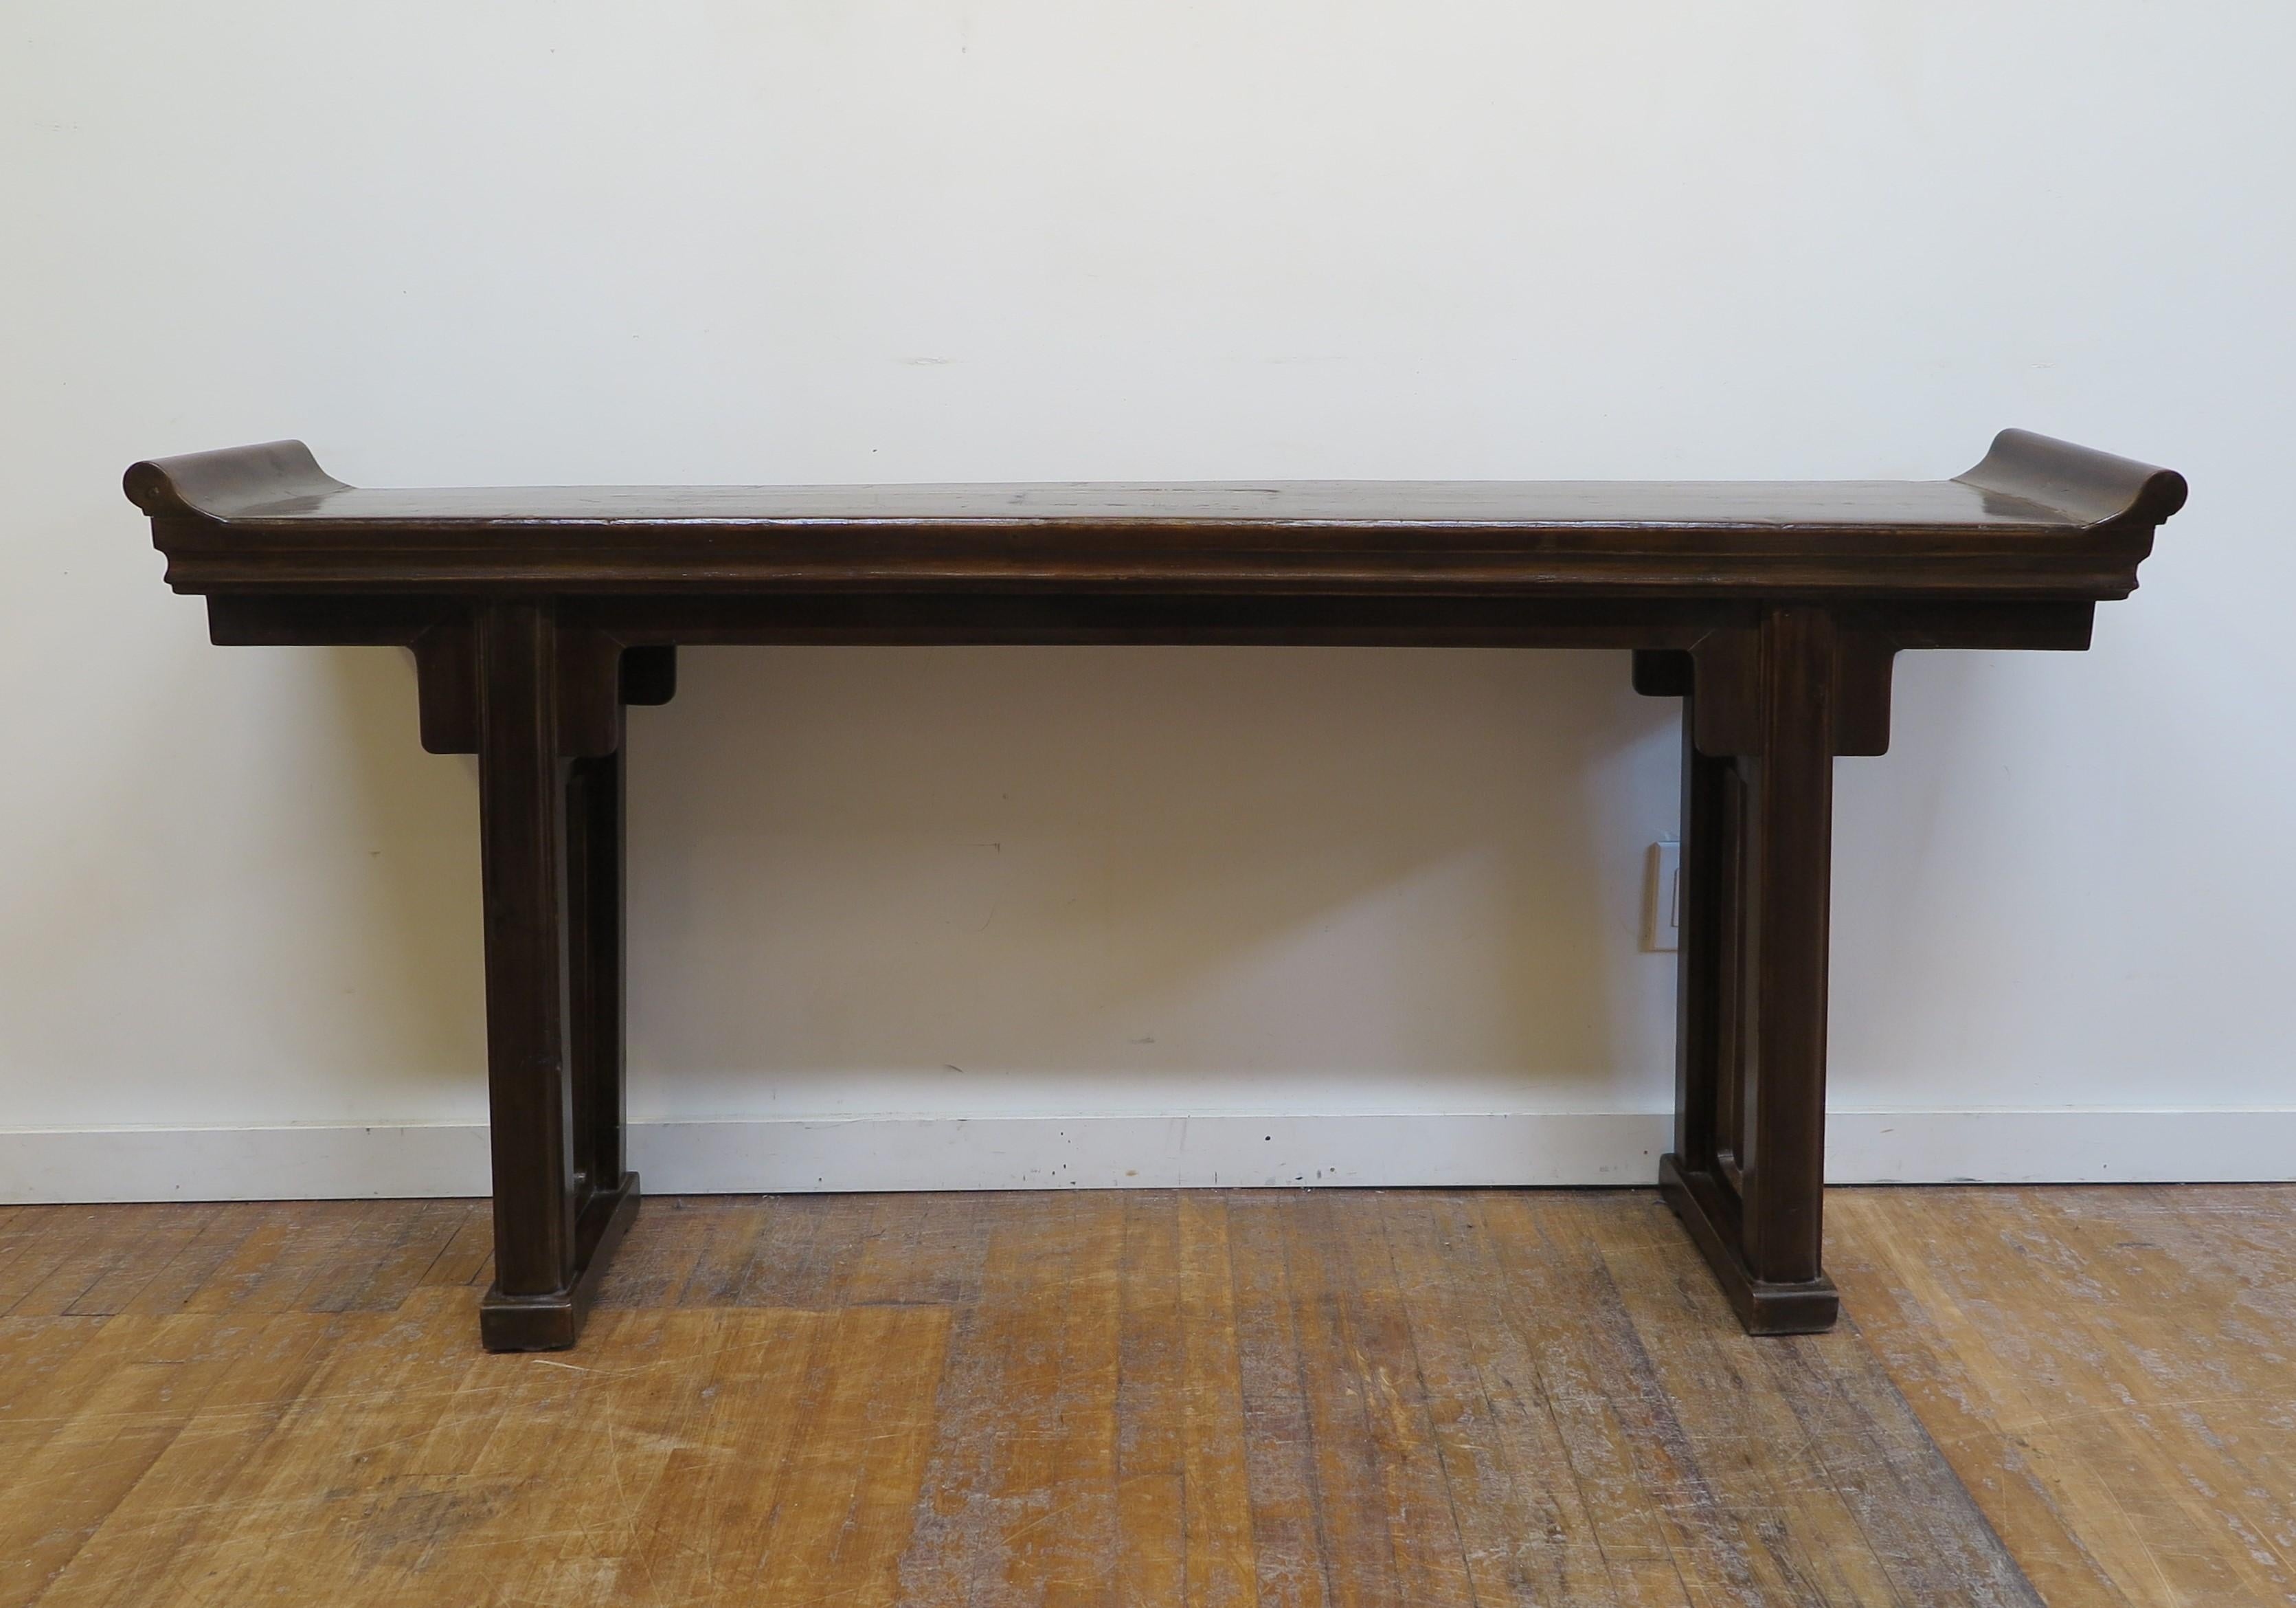 Chinese Antique Altar table console. Traditional Altar Table console of Elm wood with softly splayed legs one piece top having everted flanges attatched. Strong clean lines rooted in centuries of traditional style and craftsmanship. This altar table